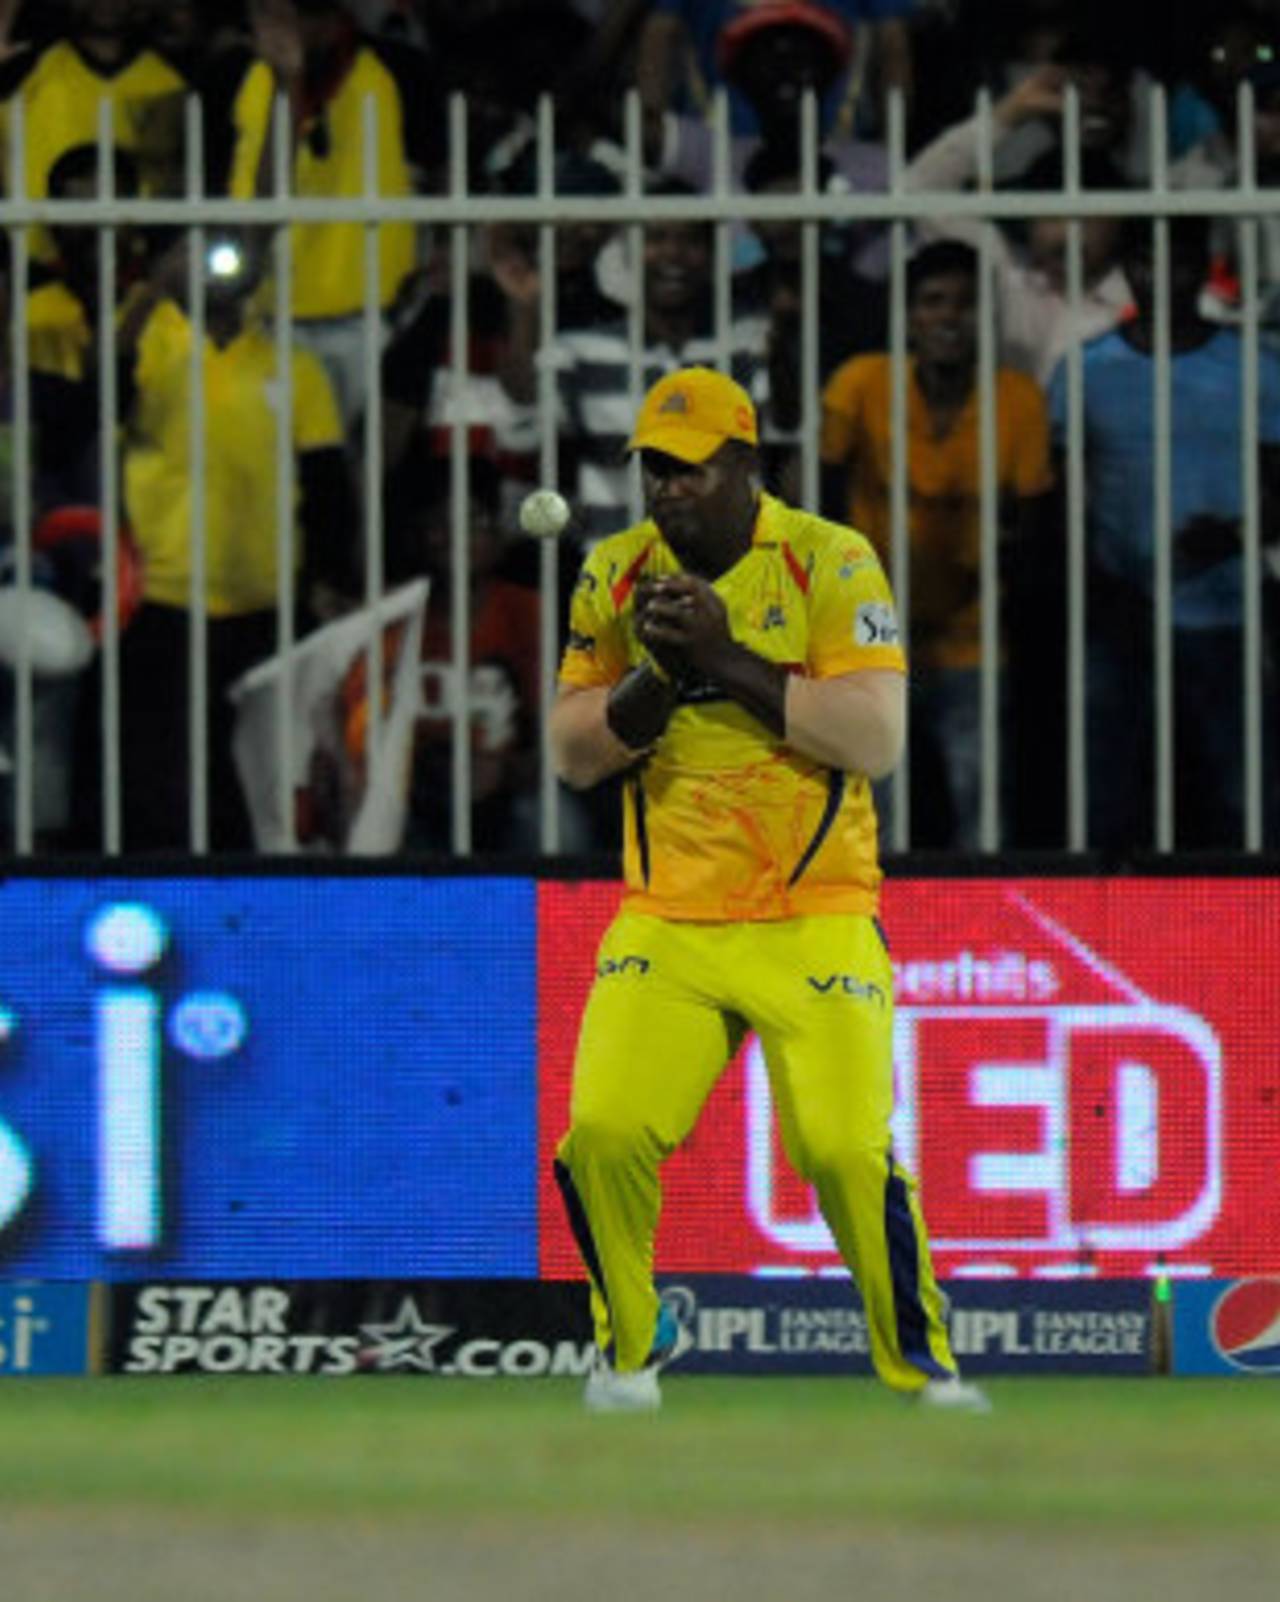 Dwayne Smith dropping a sitter - a rare sight, as Super Kings' overseas players have usually been very dependable&nbsp;&nbsp;&bull;&nbsp;&nbsp;BCCI